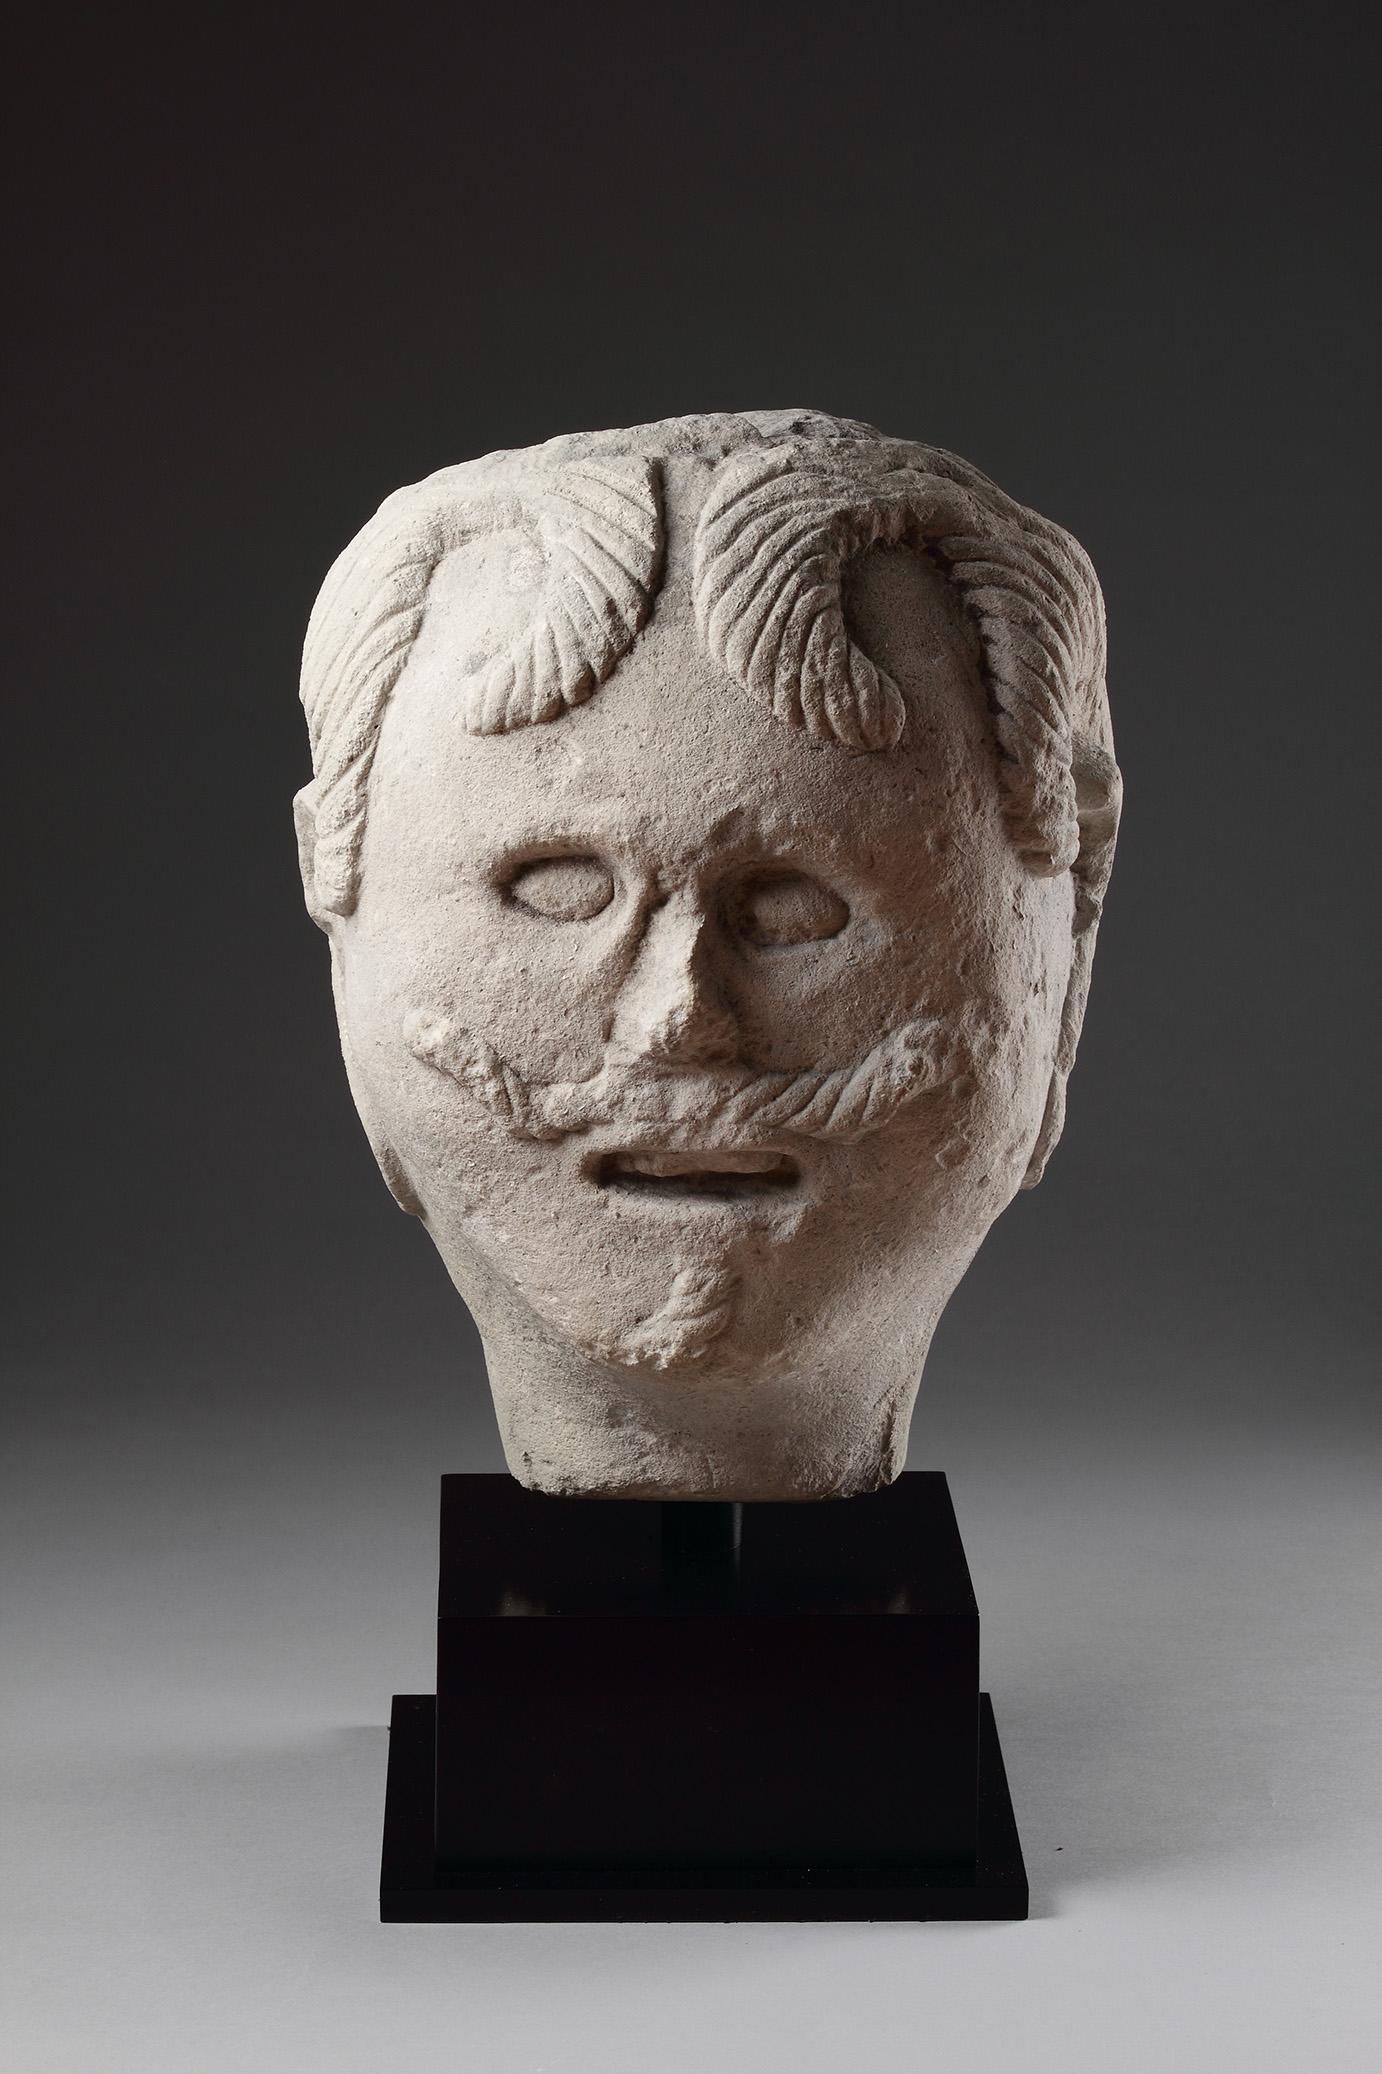 A Large European Carved Limestone Celtic Votive Head of a Male Warrior Wearing a Typical Flowing Moustache Small Beard and Curling Locks of Hair Stiffened with Lime Wash the Slit Mouth Open as if in Command
Circa 1st Century BC - 1st Century